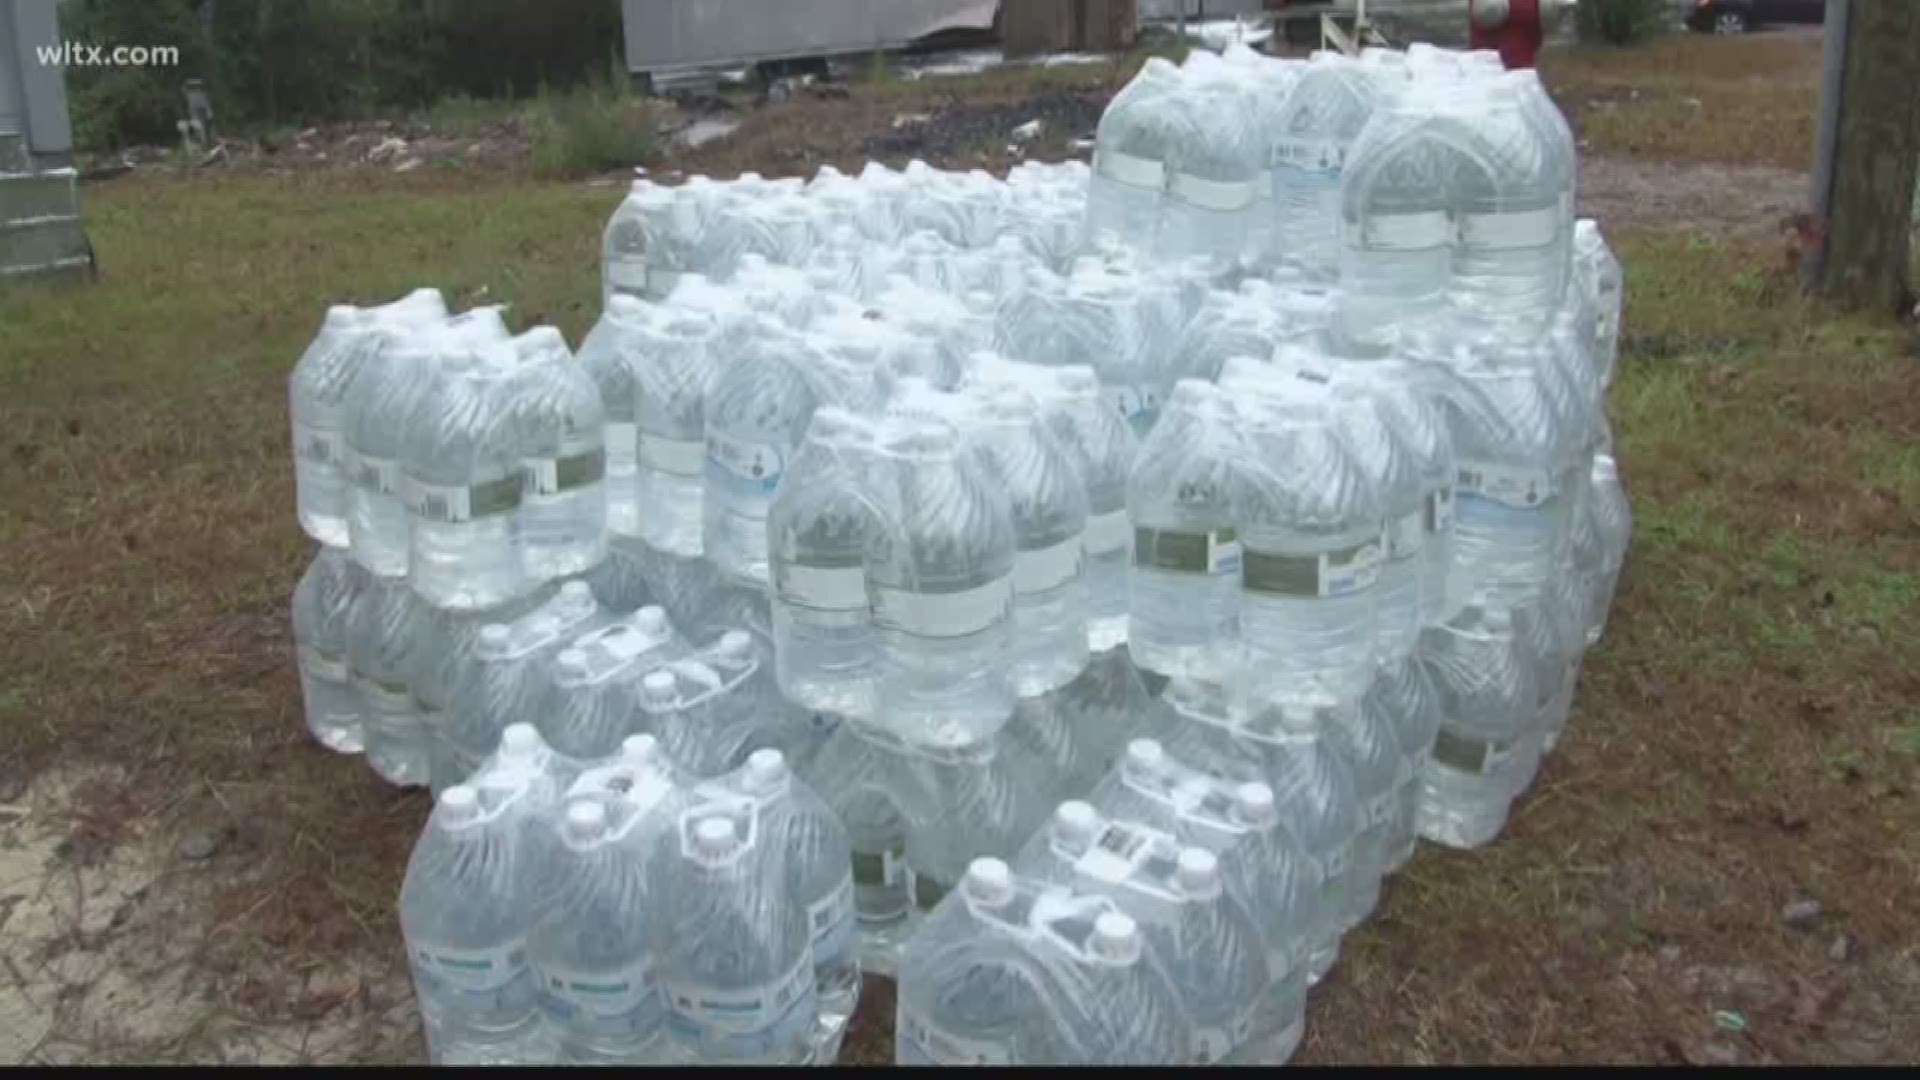 Over 16 families in a Columbia neighborhood have been without water for two weeks ... and now its back on.